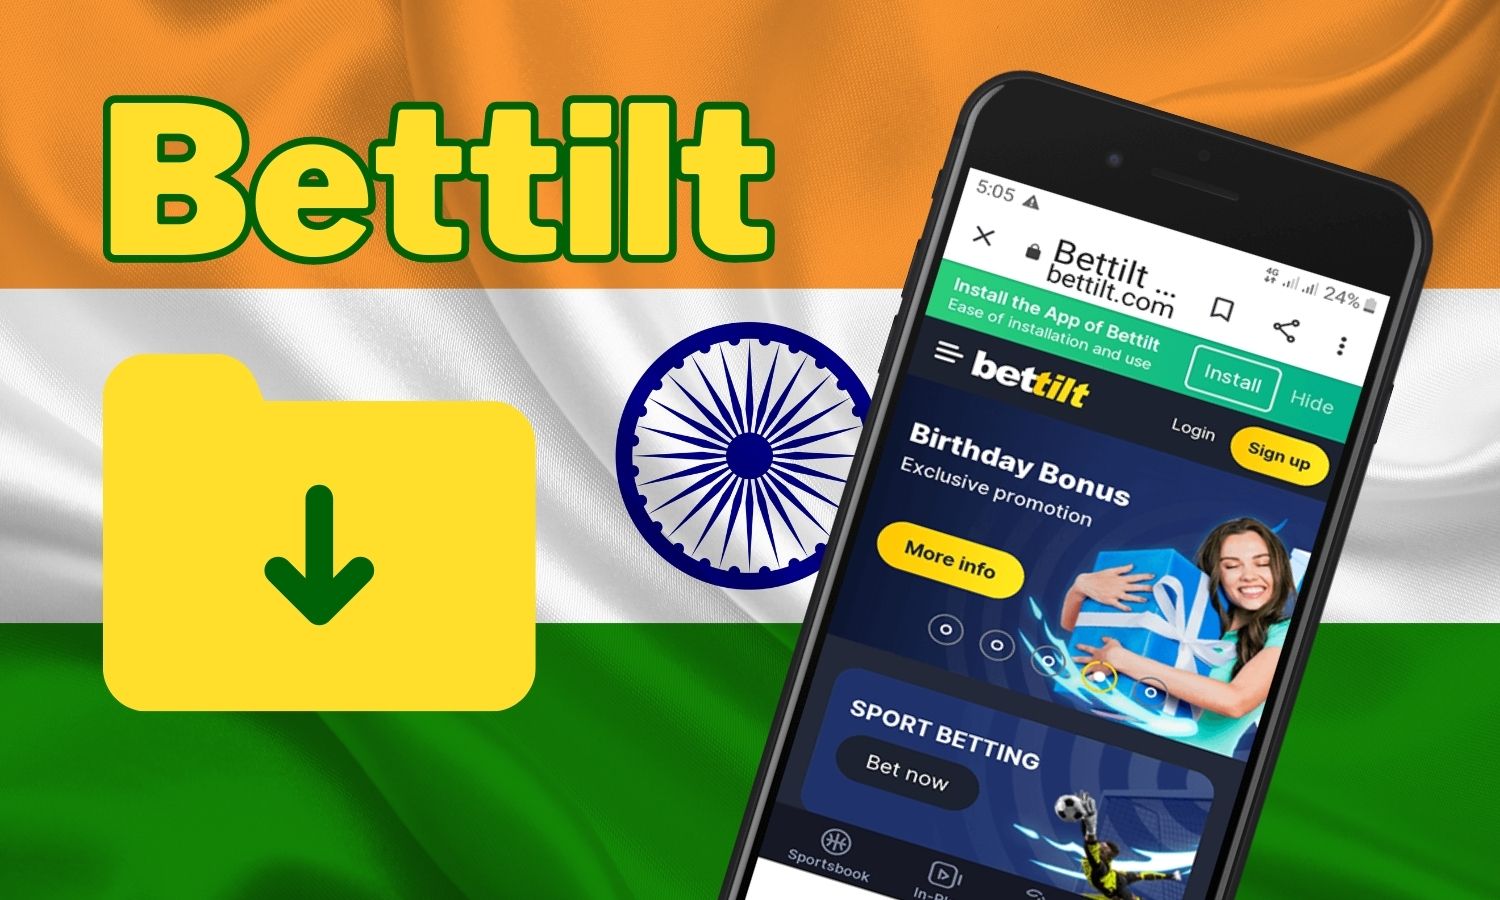 How to download Bettilt mobile application